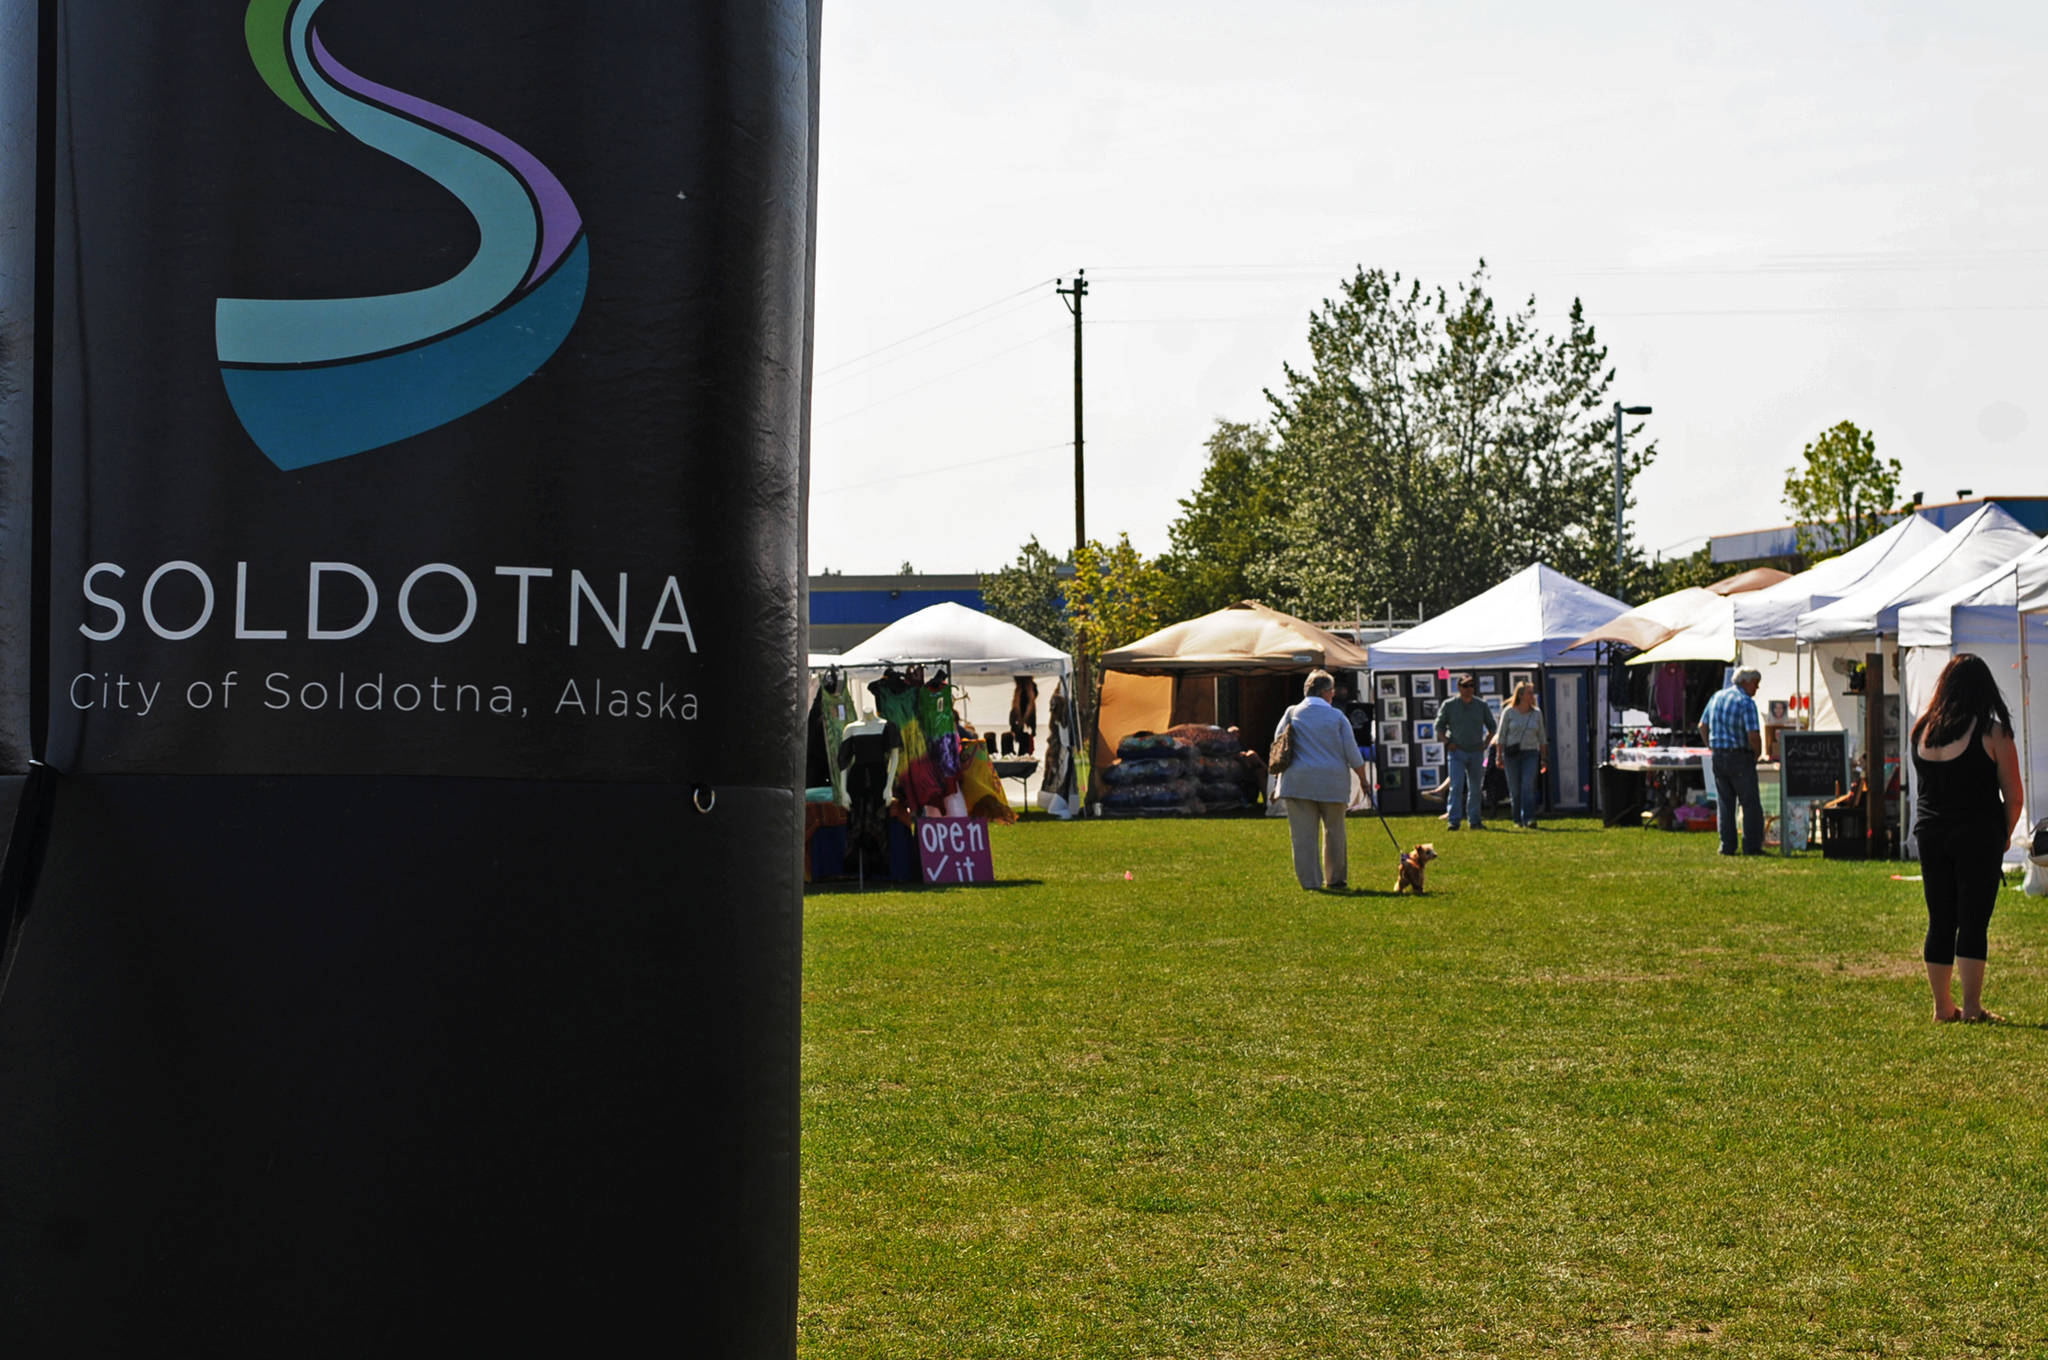 In this Wednesday, July 12, 2017 photo, people walk among the stalls at the Soldotna Wednesday Market in Soldotna, Alaska. The Soldotna Chamber of Commerce organizes the market each week for local vendors and features local musicians. (Photo by Elizabeth Earl/Peninsula Clarion, file)